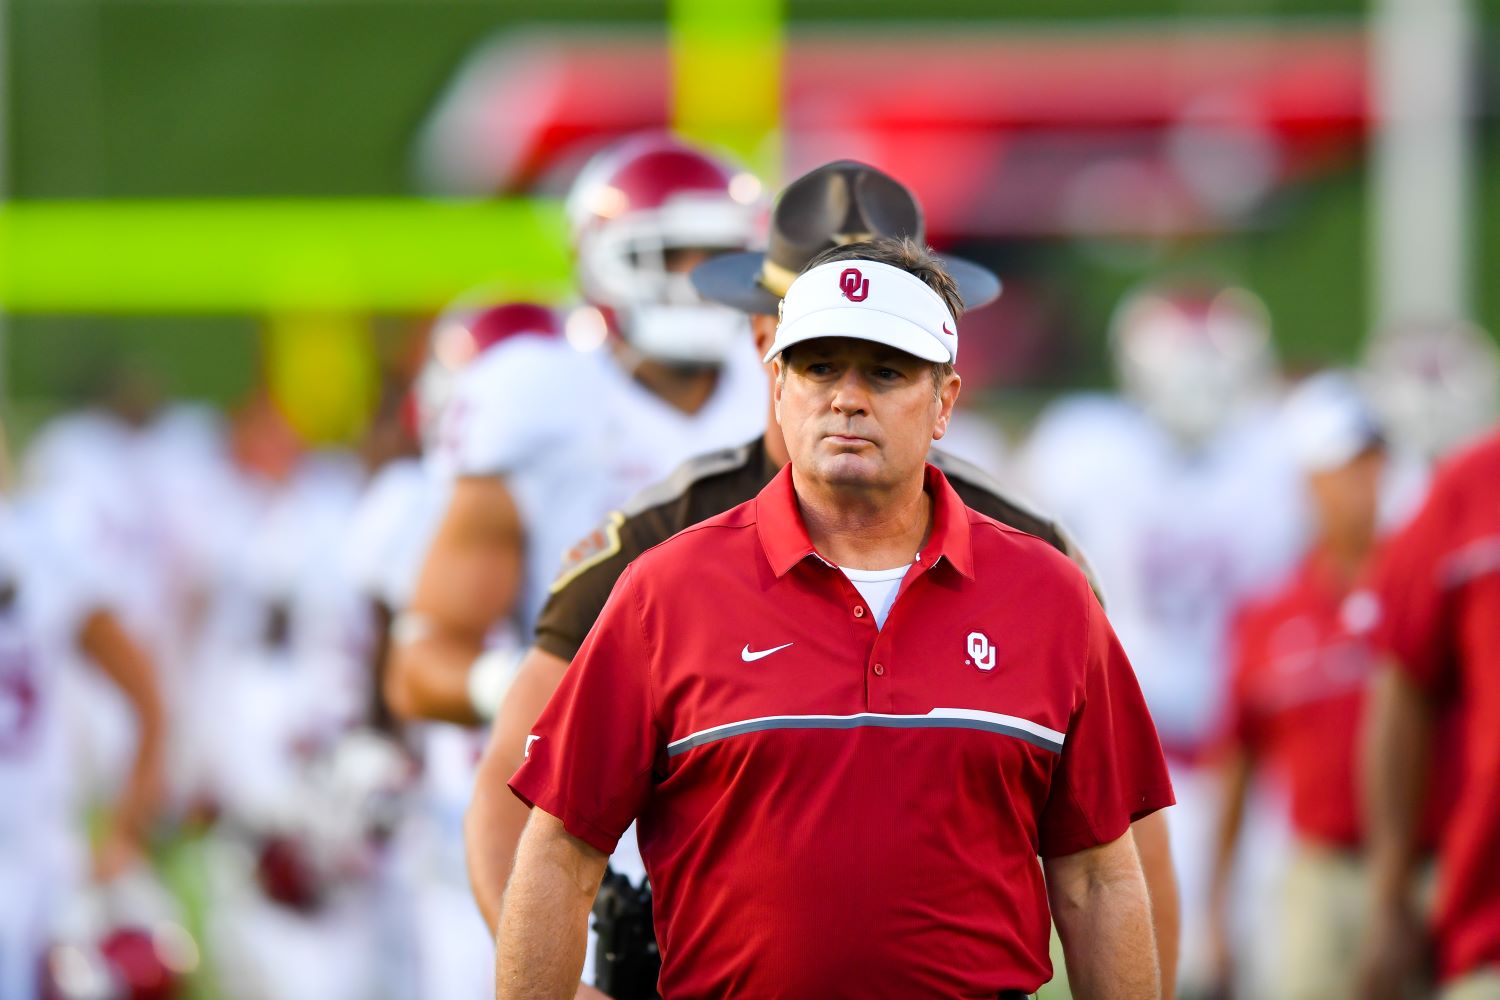 Bob Stoops is helping coach again at Oklahoma because of COVID-19.